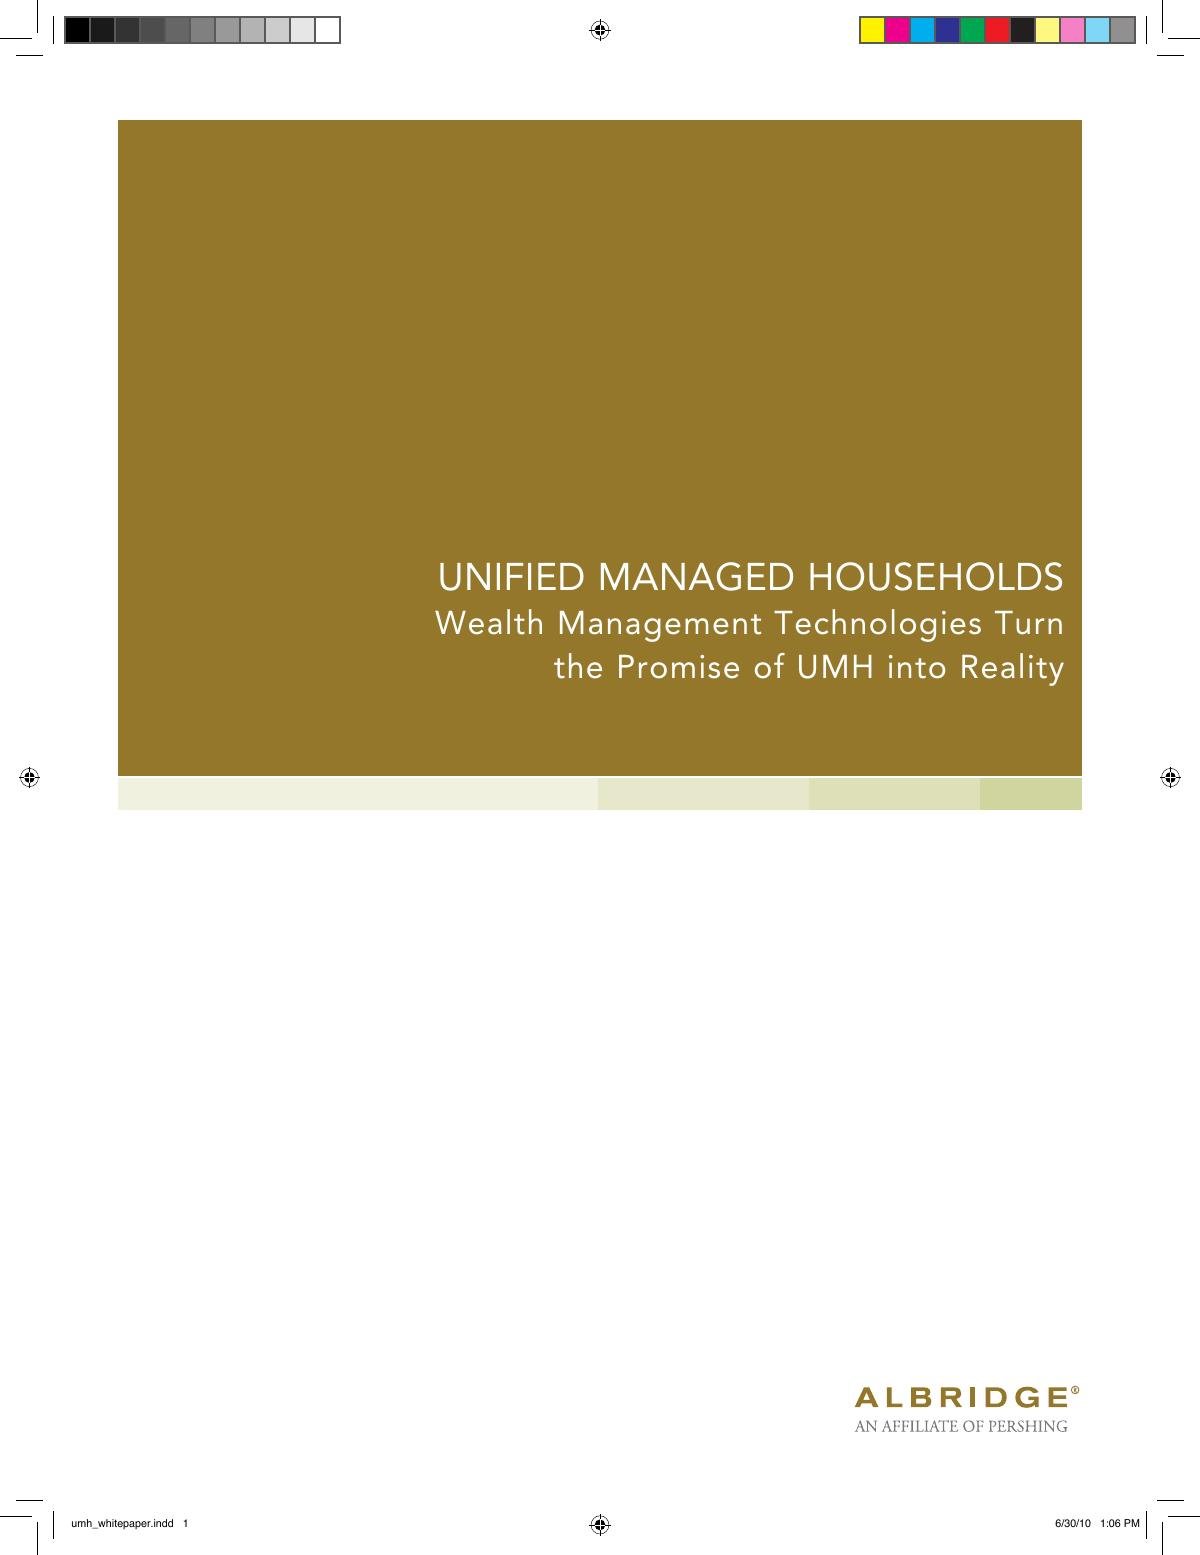 Unified Managed Households: Wealth Management Technologies Turn the Promise of UMH into Reality